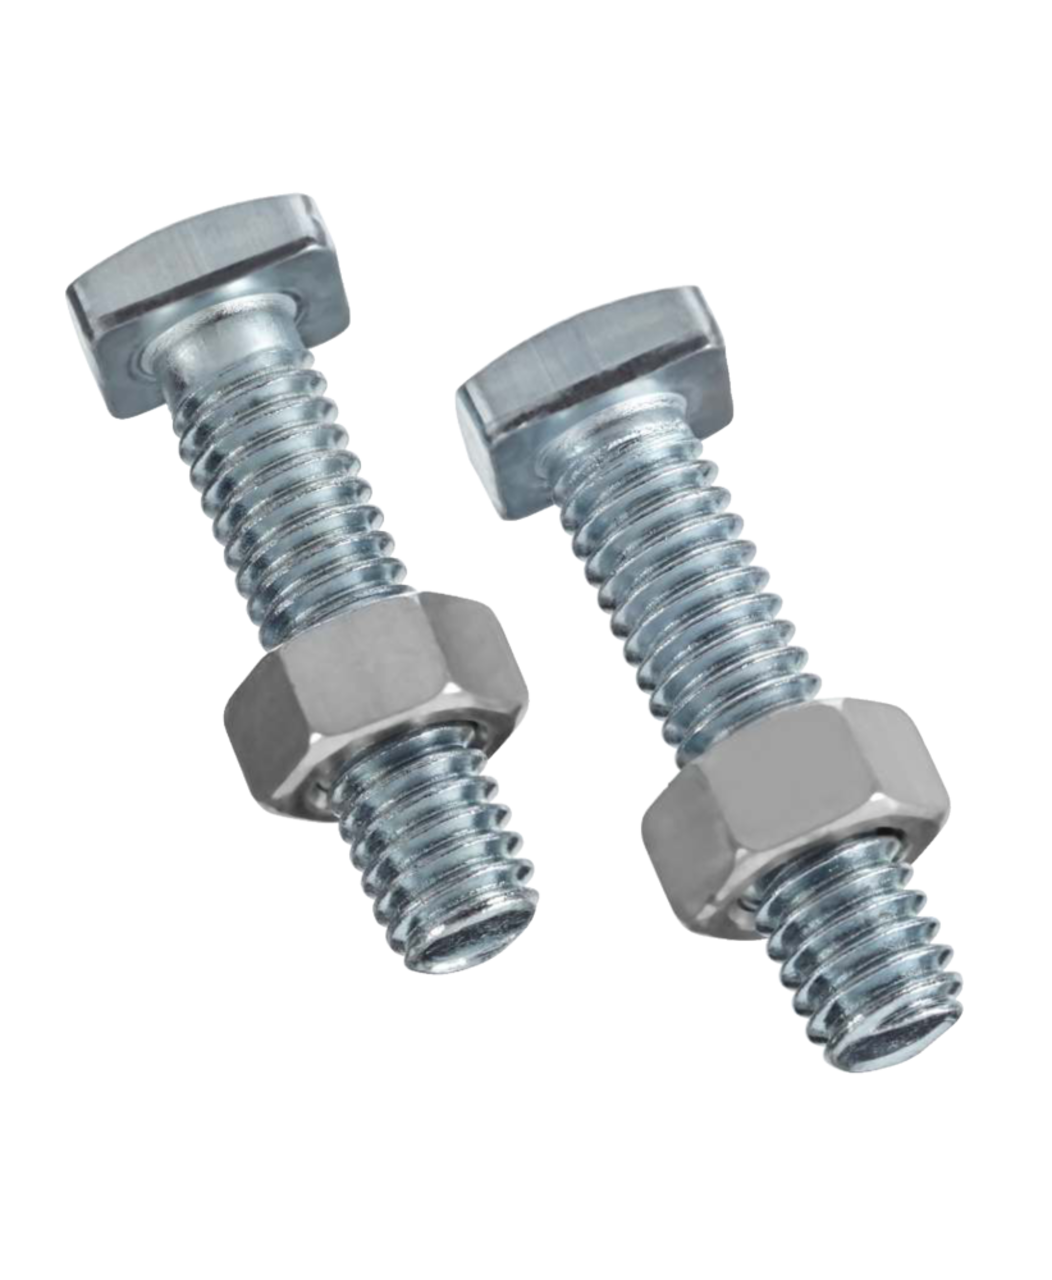 https://media-www.canadiantire.ca/product/automotive/light-auto-parts/auto-battery-accessories/0113520/3520-batt-bolt-nut-4d9d5810-a372-47a9-9cb4-4f4adce81488.png?imdensity=1&imwidth=640&impolicy=mZoom